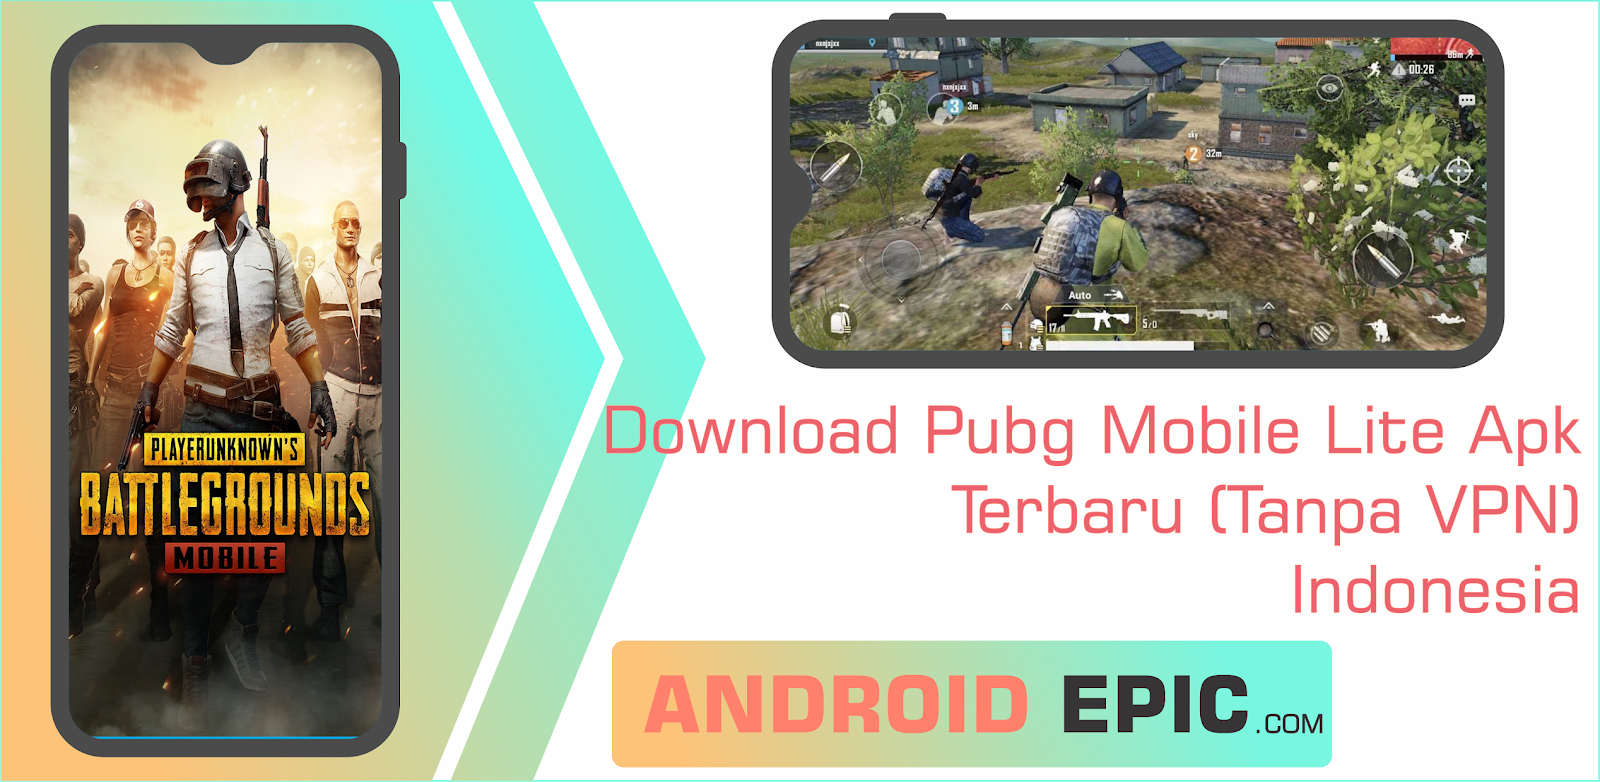 Download failed because you may not have purchased this app pubg mobile фото 105